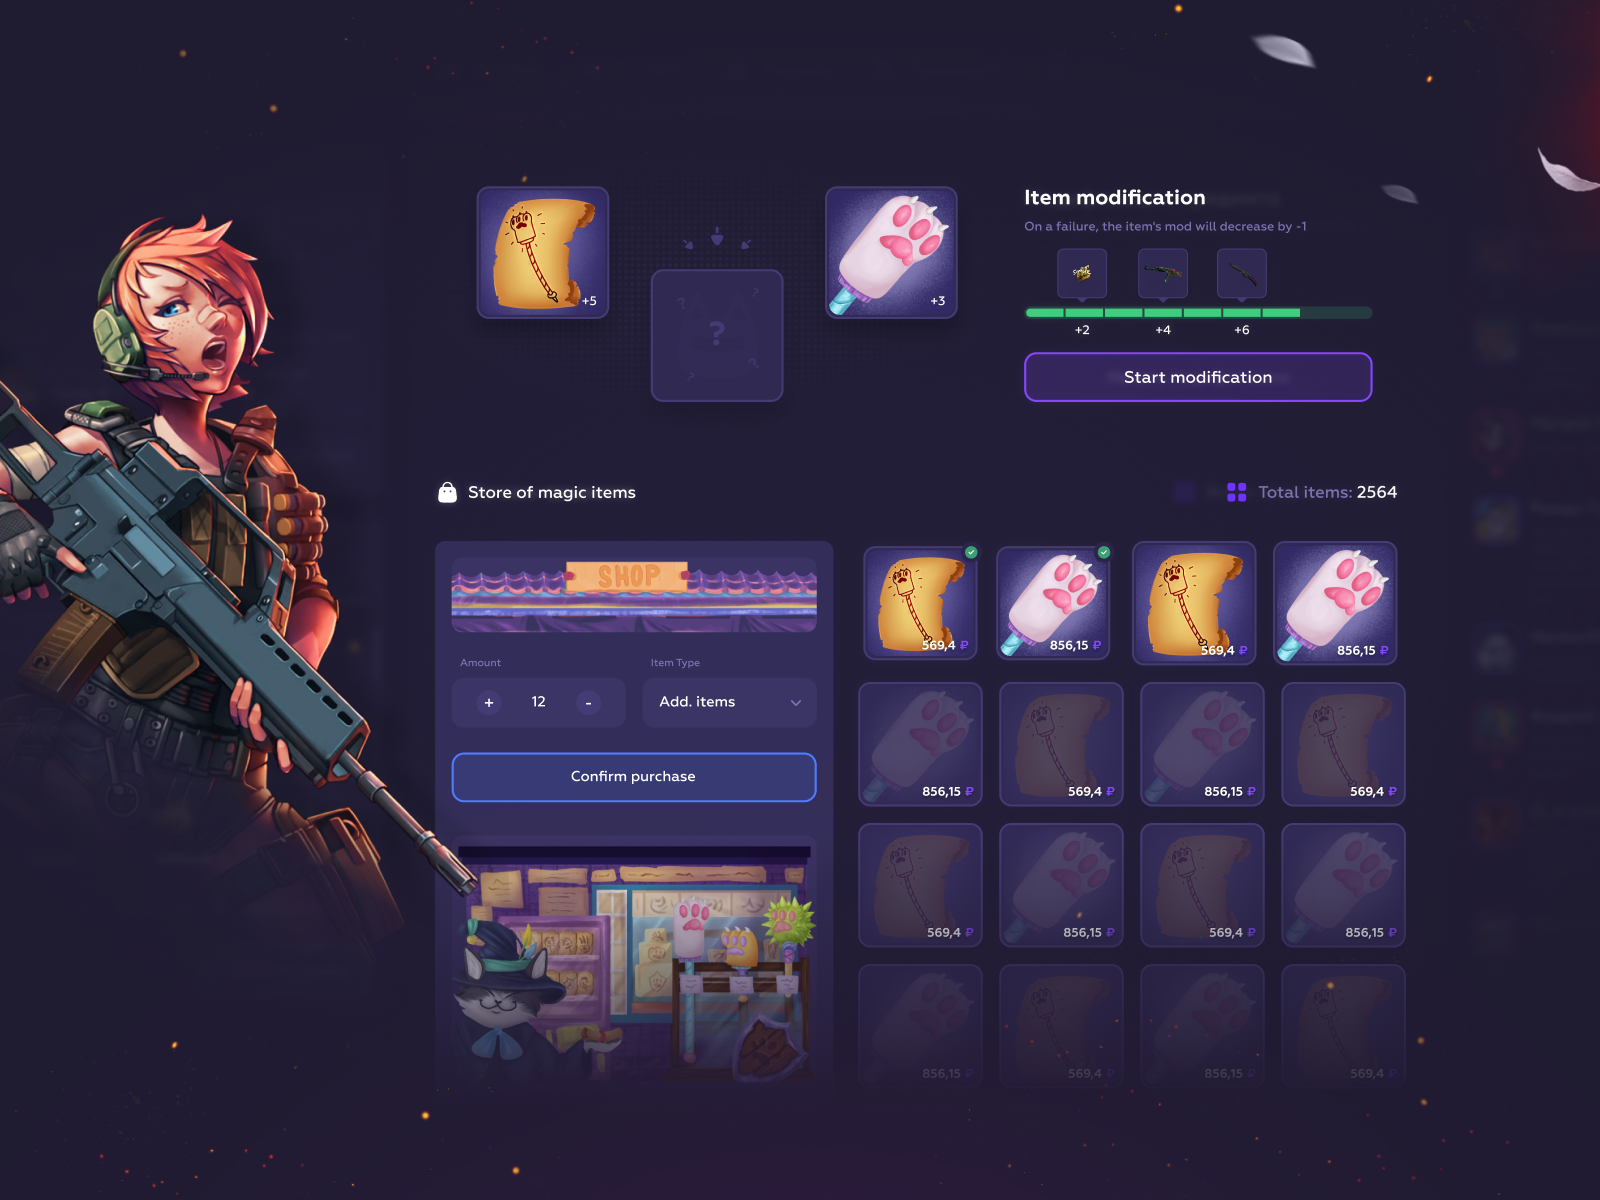 Gaming Interface. Enchant - Items Modification by Alex Herzog on Dribbble